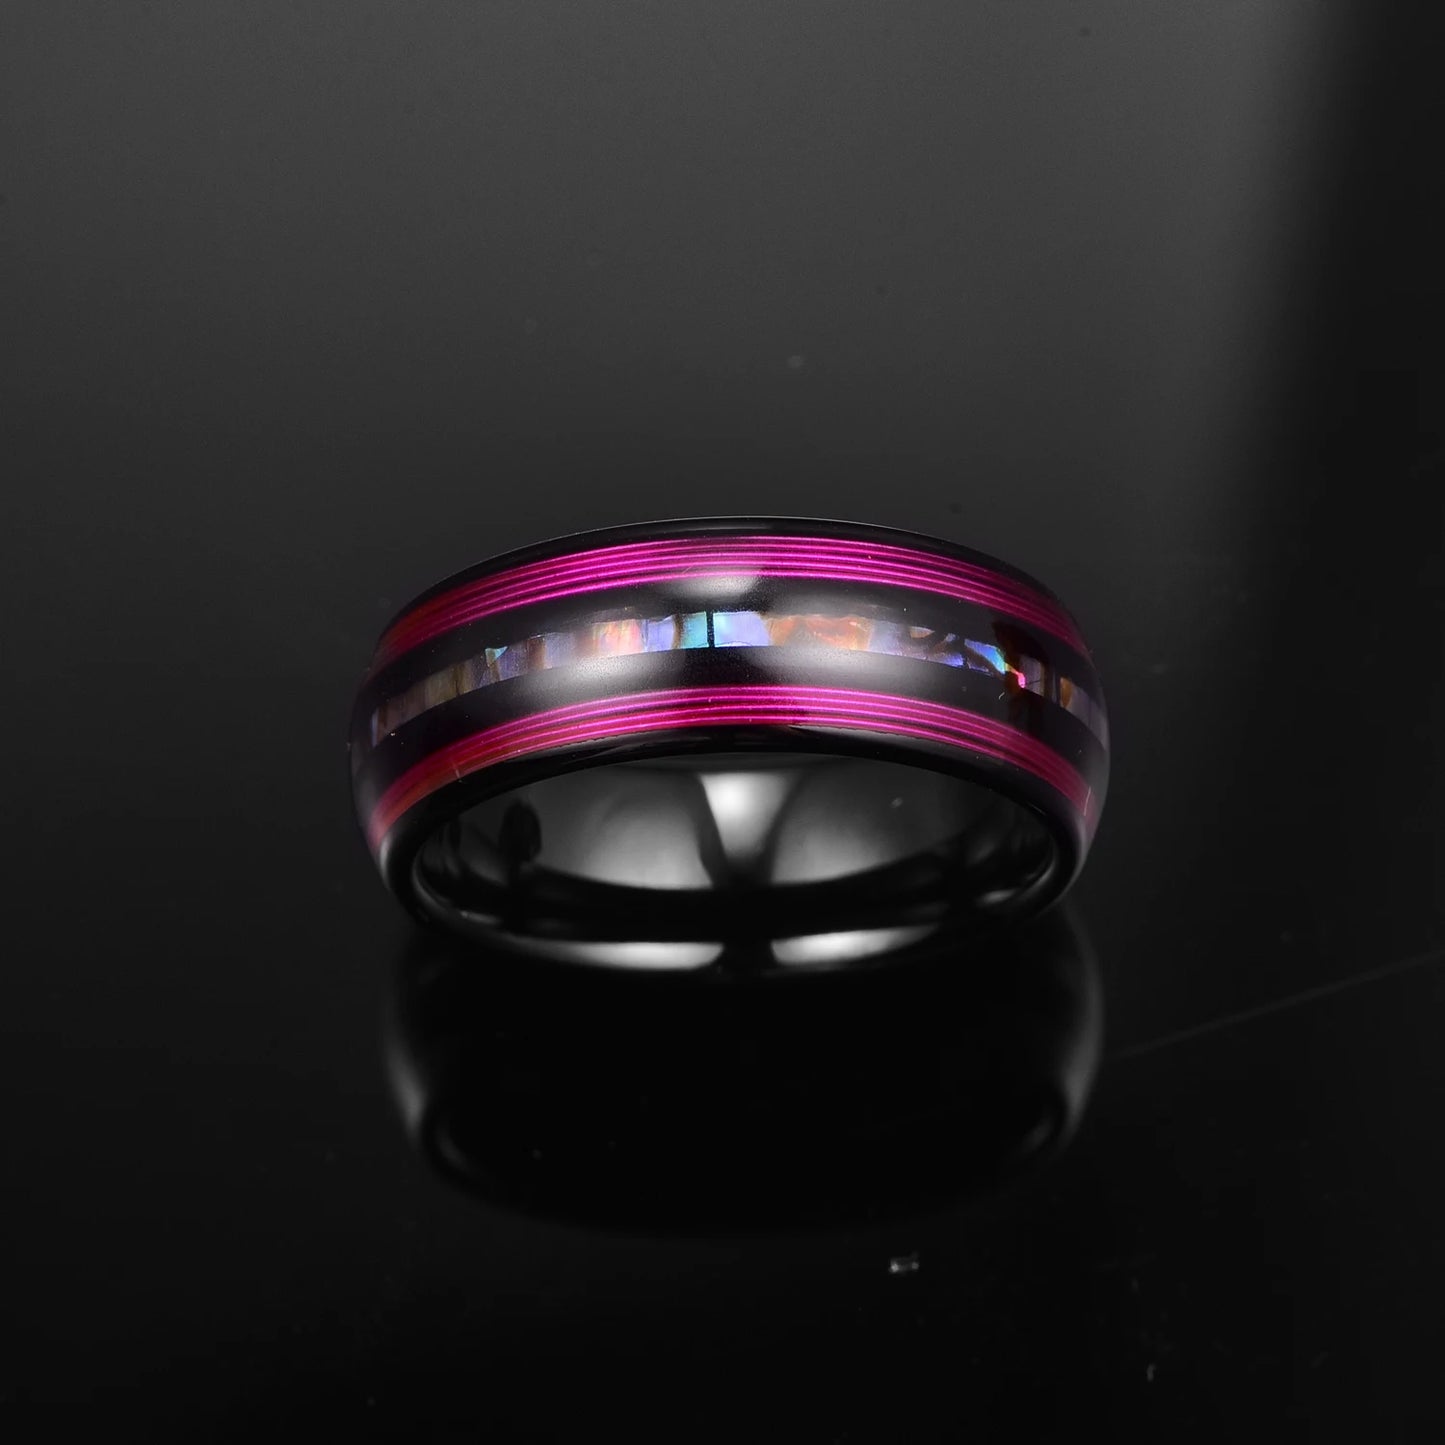 8mm Dome Black Tungsten Wedding Band with String & Abalone Inlay-Black Diamonds New York